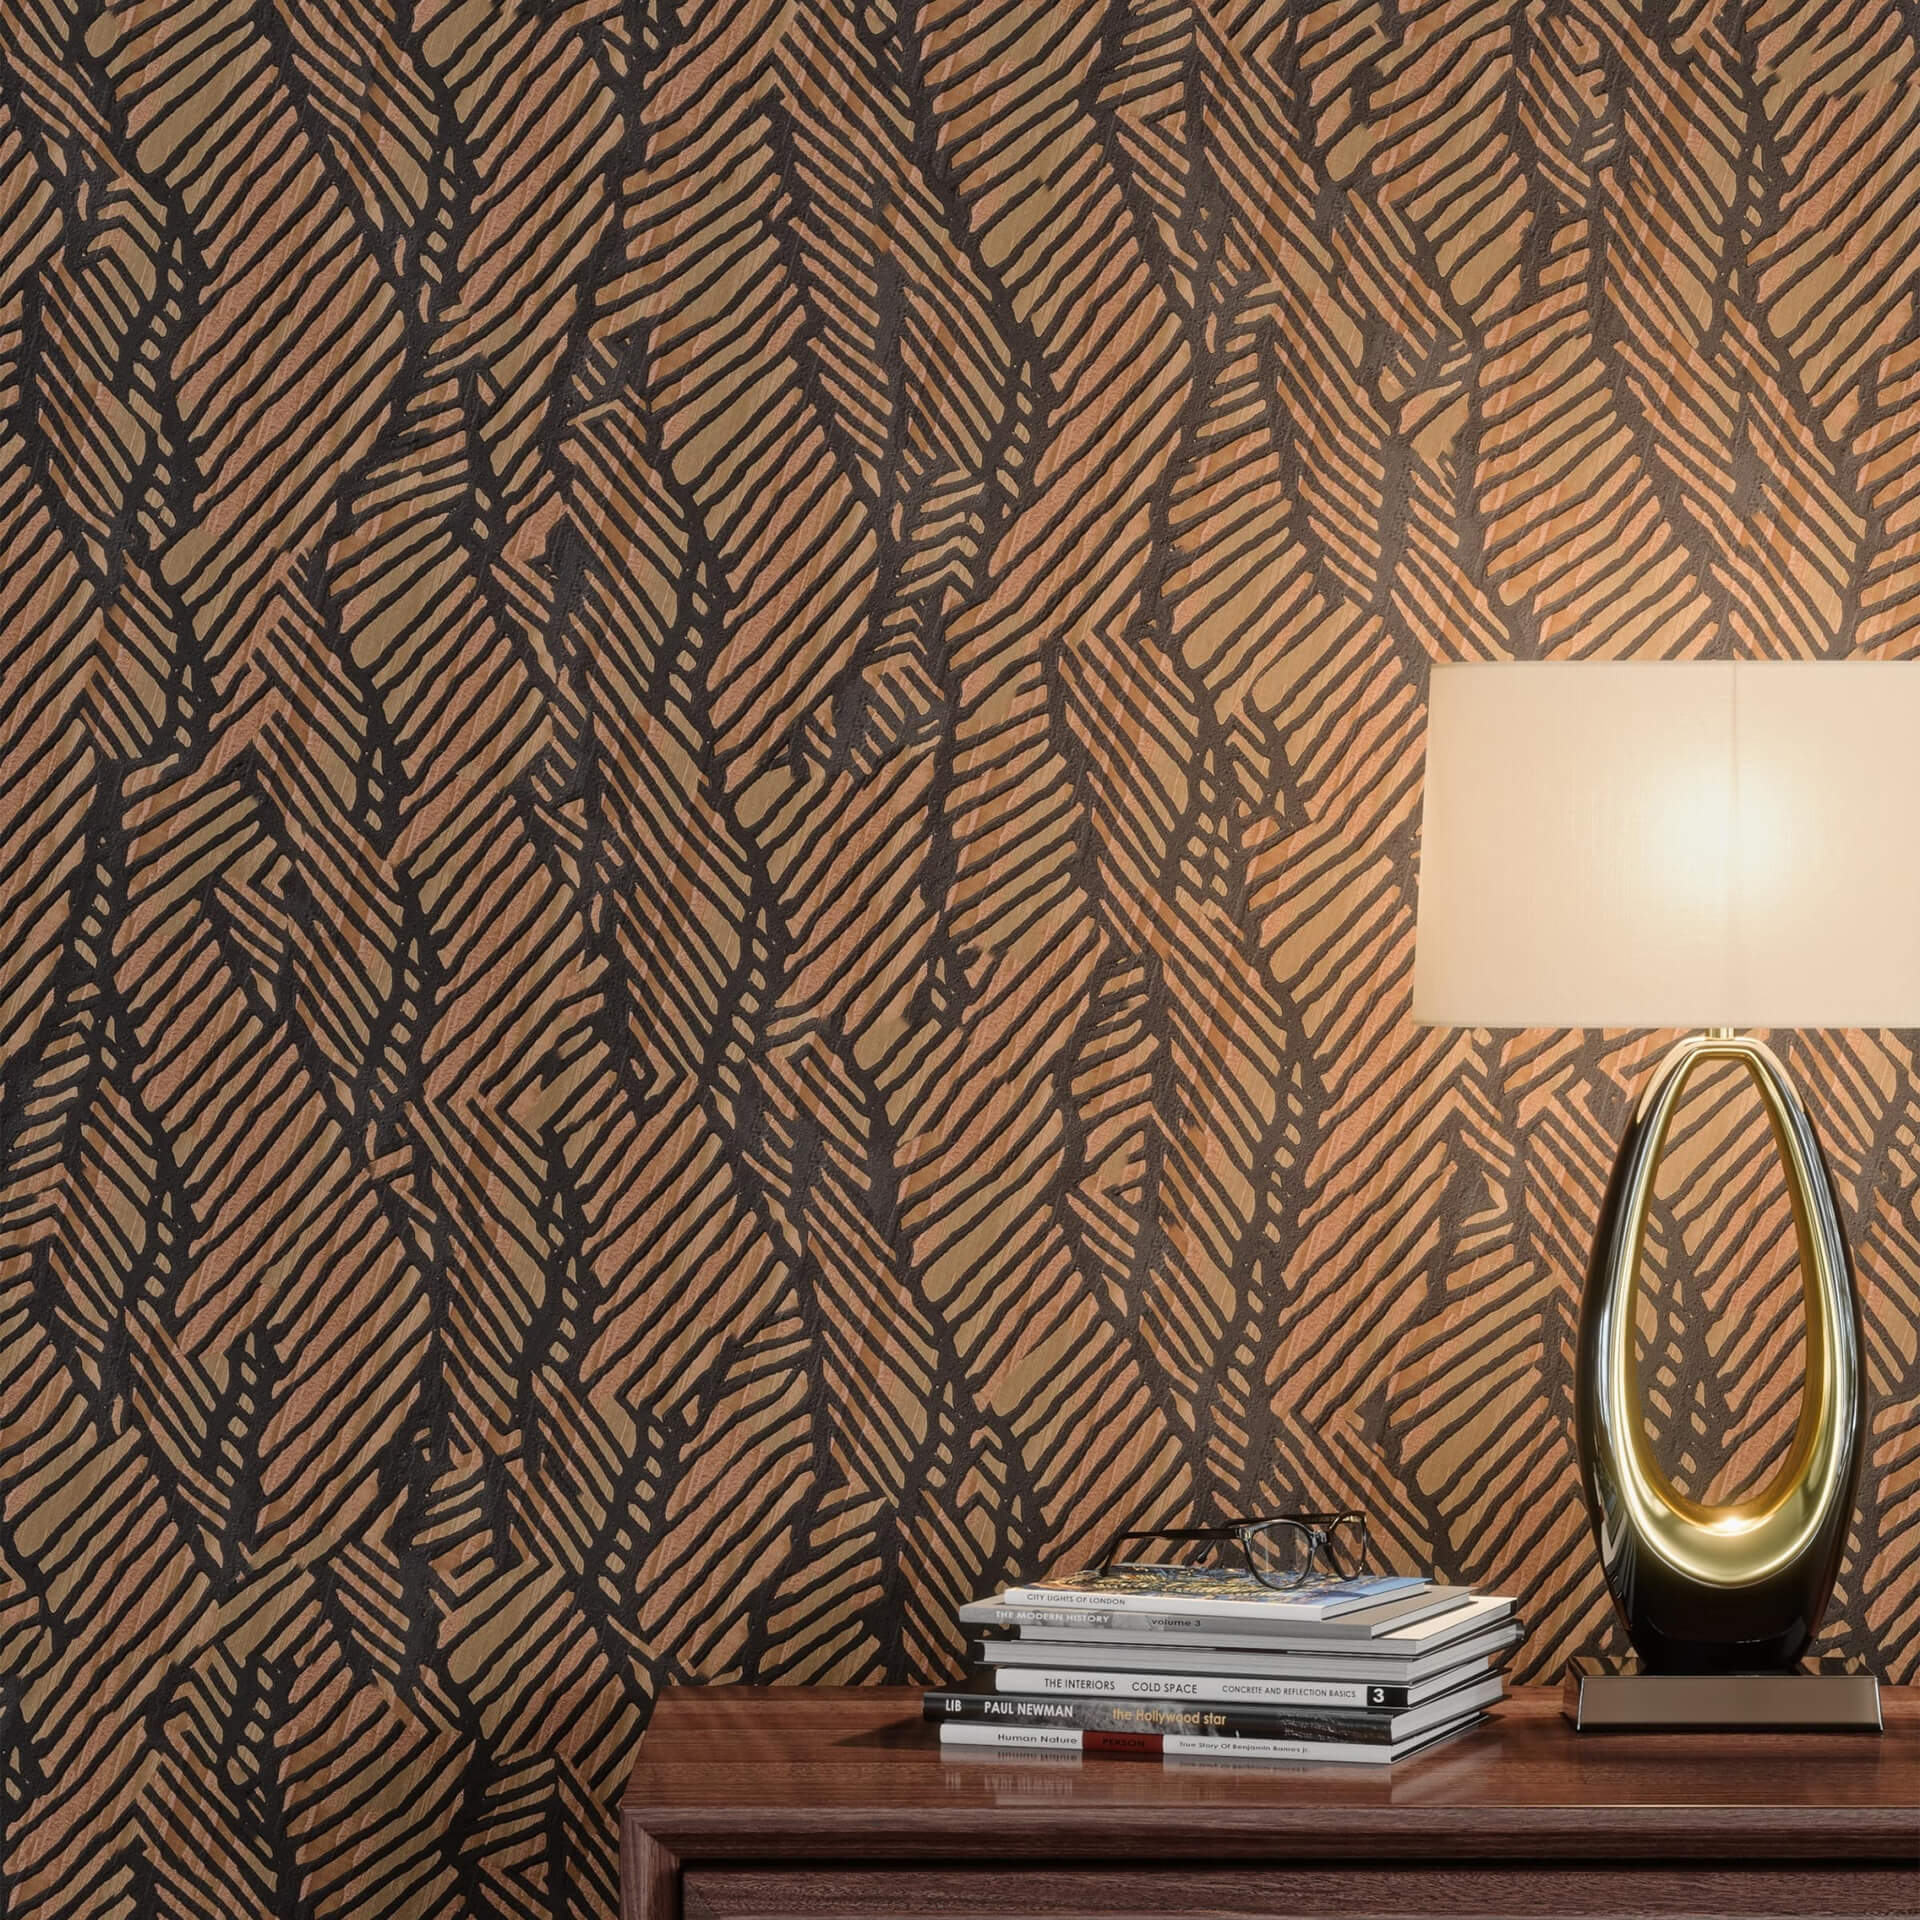 3D Visualization for Brown Patterned Wallpaper